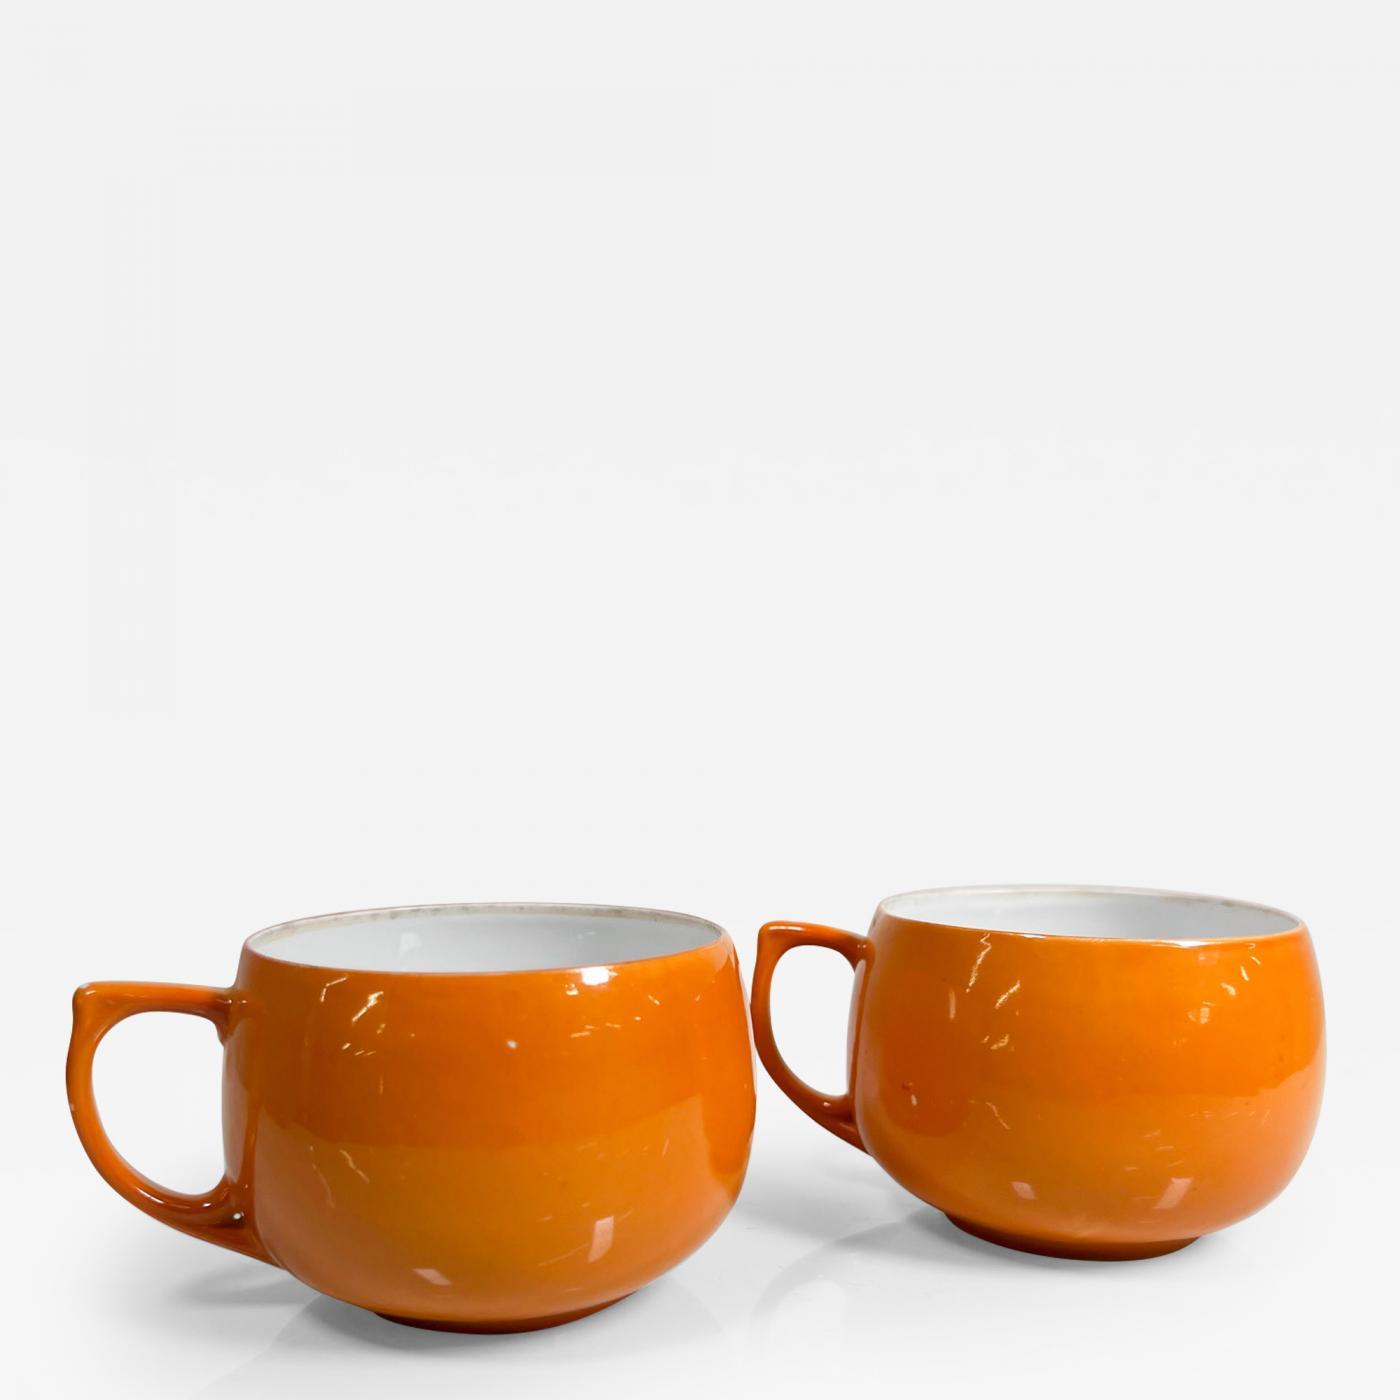 https://cdn.incollect.com/sites/default/files/zoom/1950s-Modern-Meito-Fine-China-Hand-Painted-Two-Orange-Cups-Japan-659392-3205885.jpg